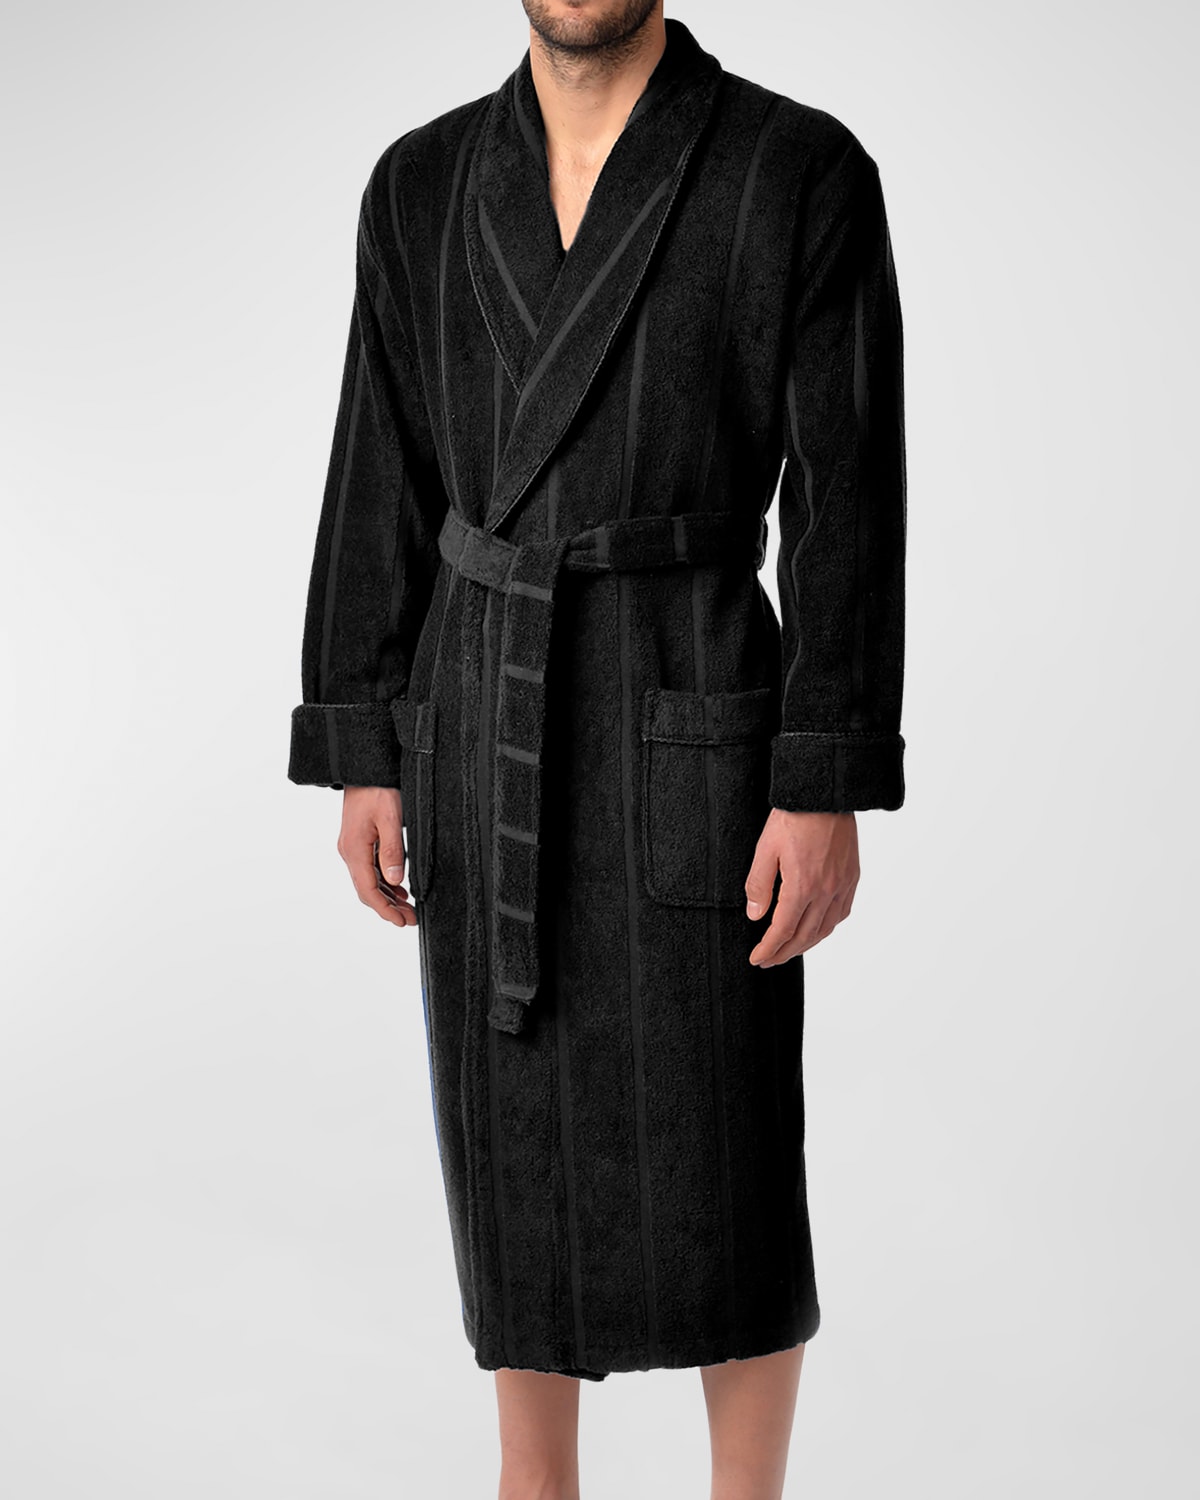 Majestic Men's Ultra Lux Jacquard Shawl Dressing Gown In Black